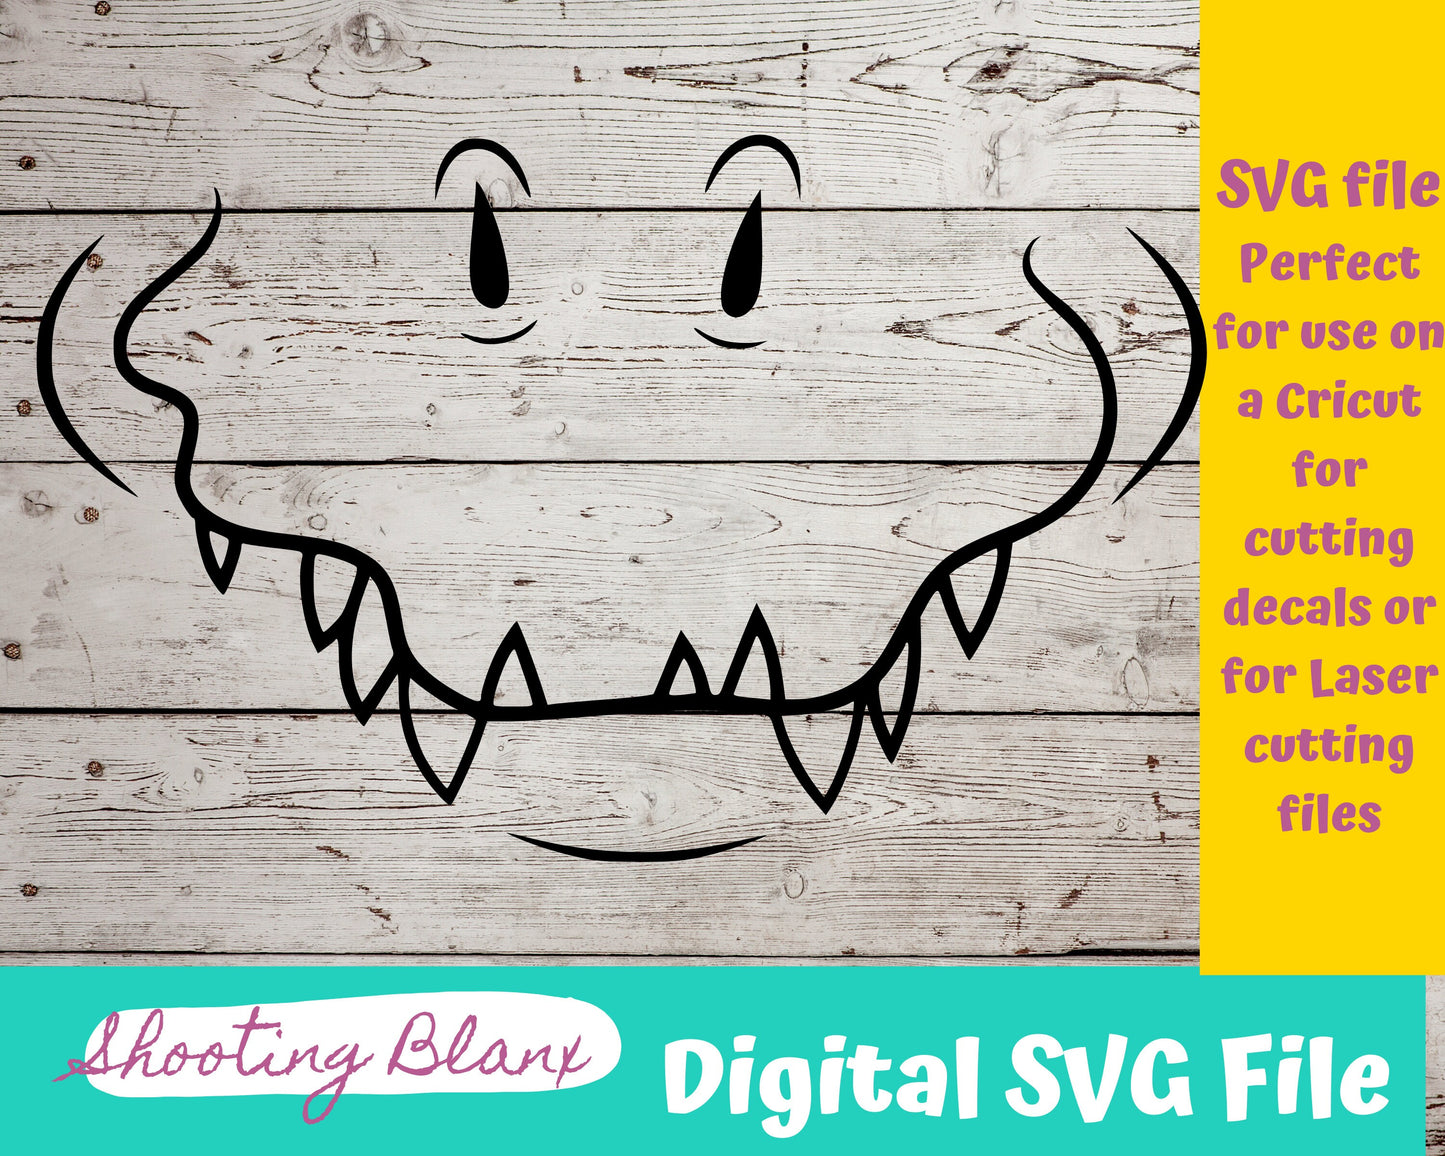 Tiger Mouth SVG file perfect for Cricut, Cameo, or Silhouette also for laser engraving Glowforge, half face, mask, sublimation